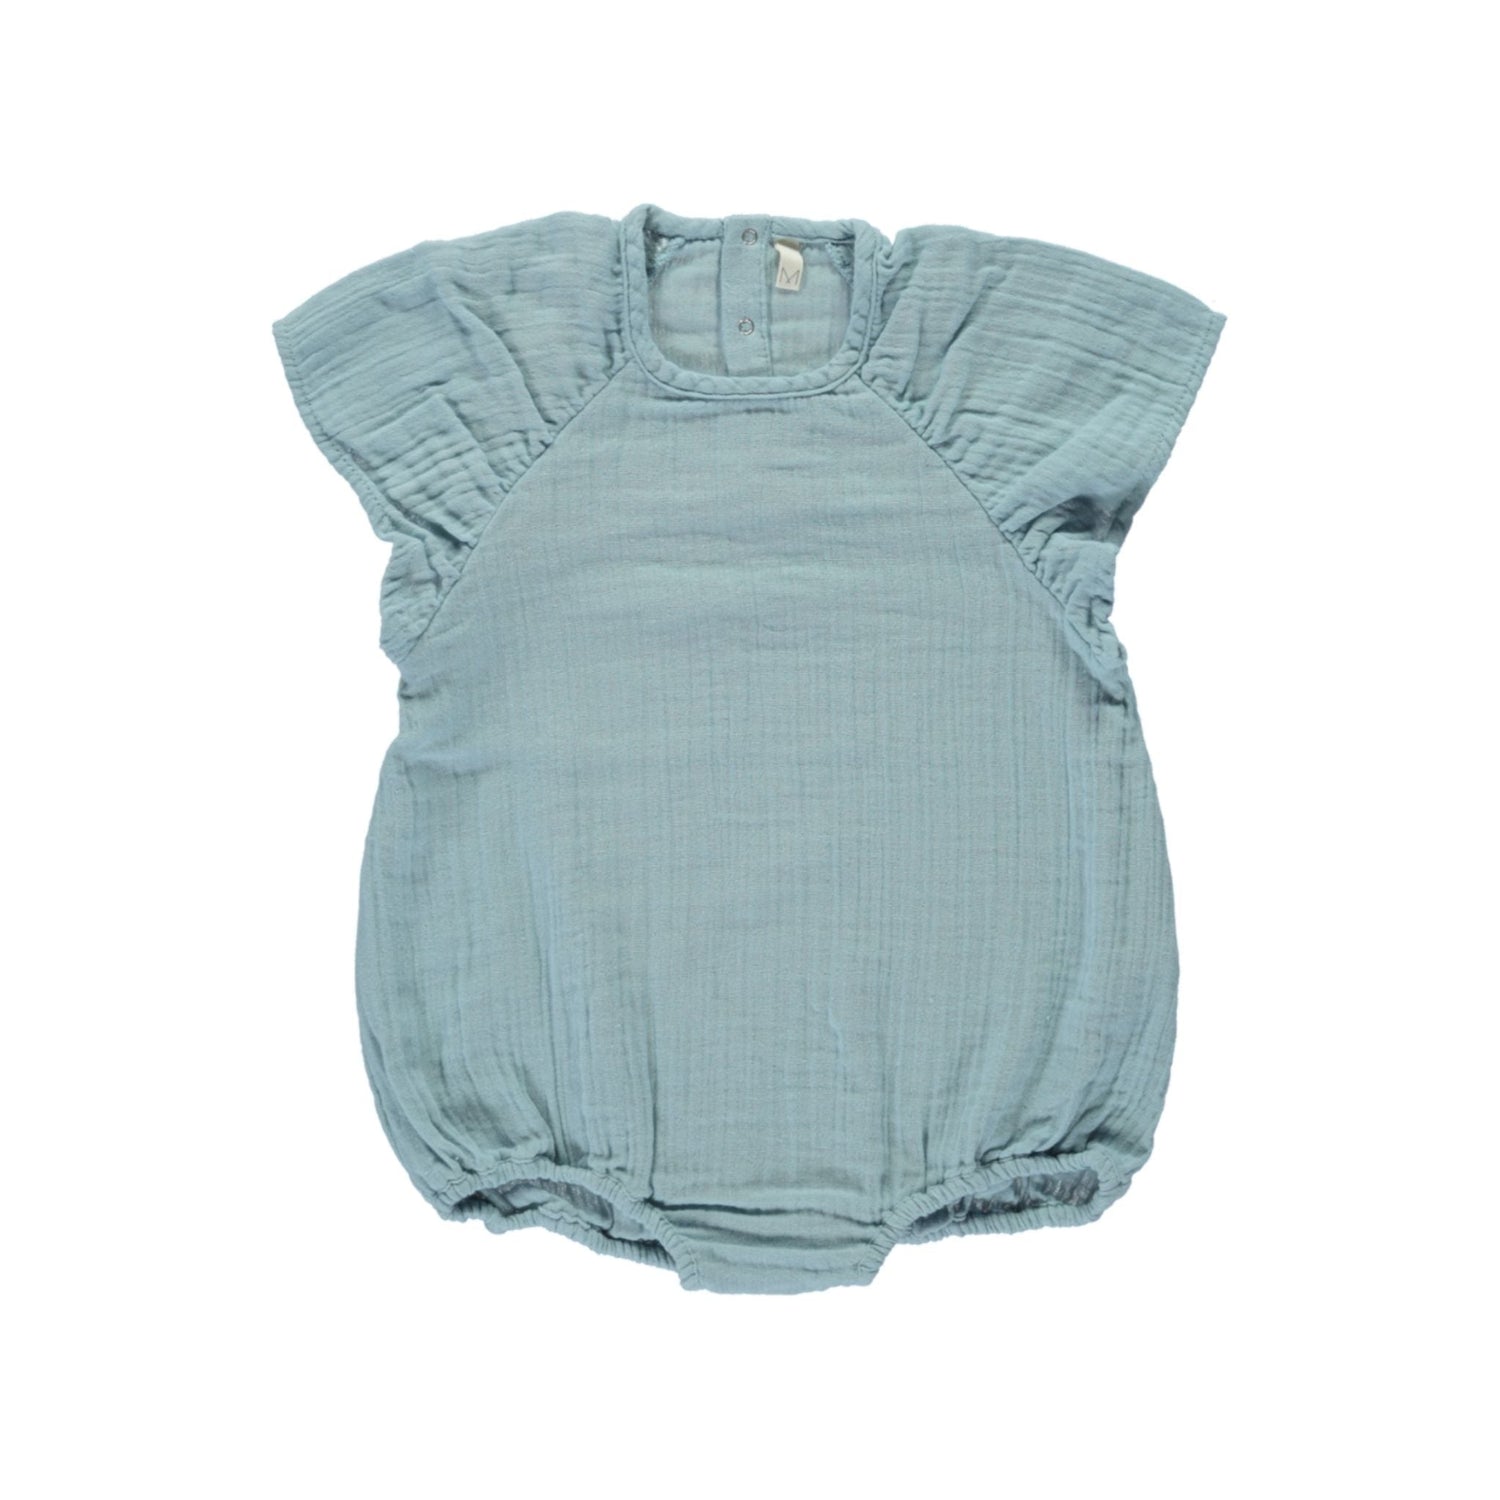 Sky Puff Overall Baby Grows MonKind 